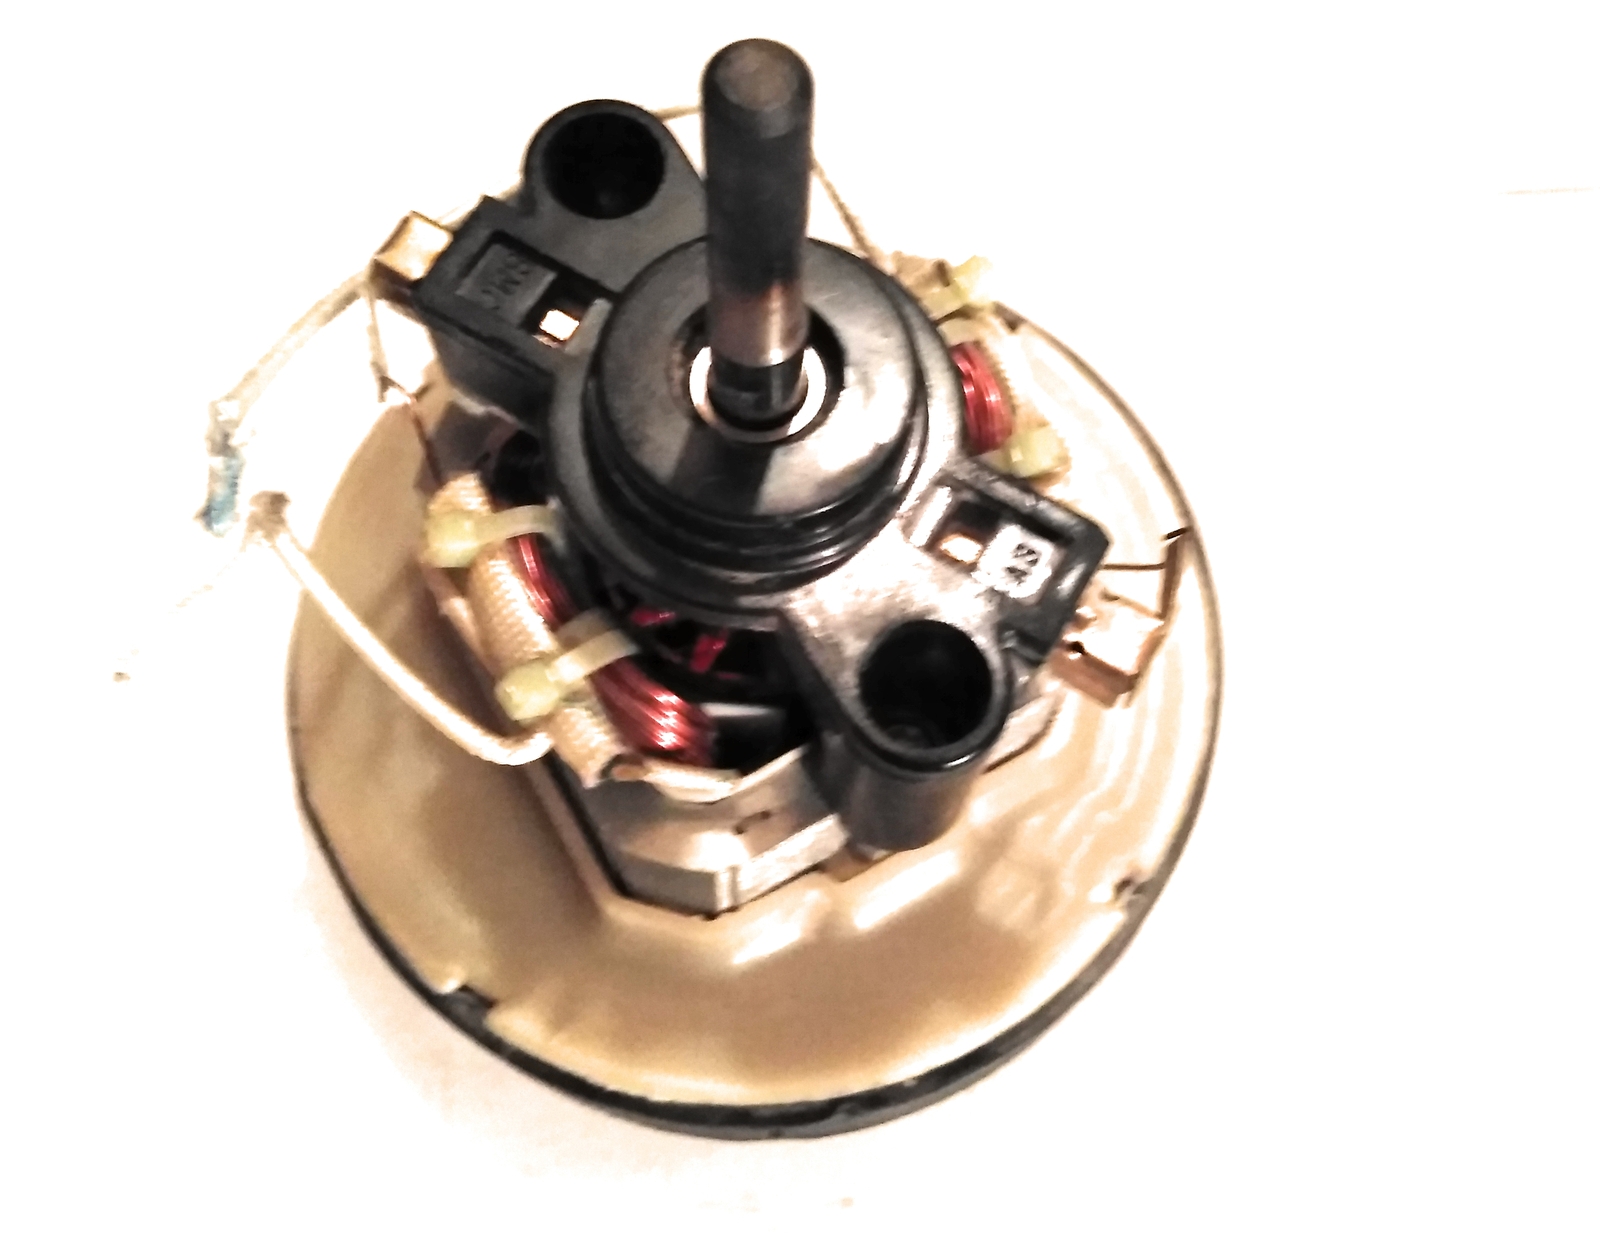 Bissell 13H8 Powerswift Compact Vacuum Motor With Gasket 2032183 - $24.99